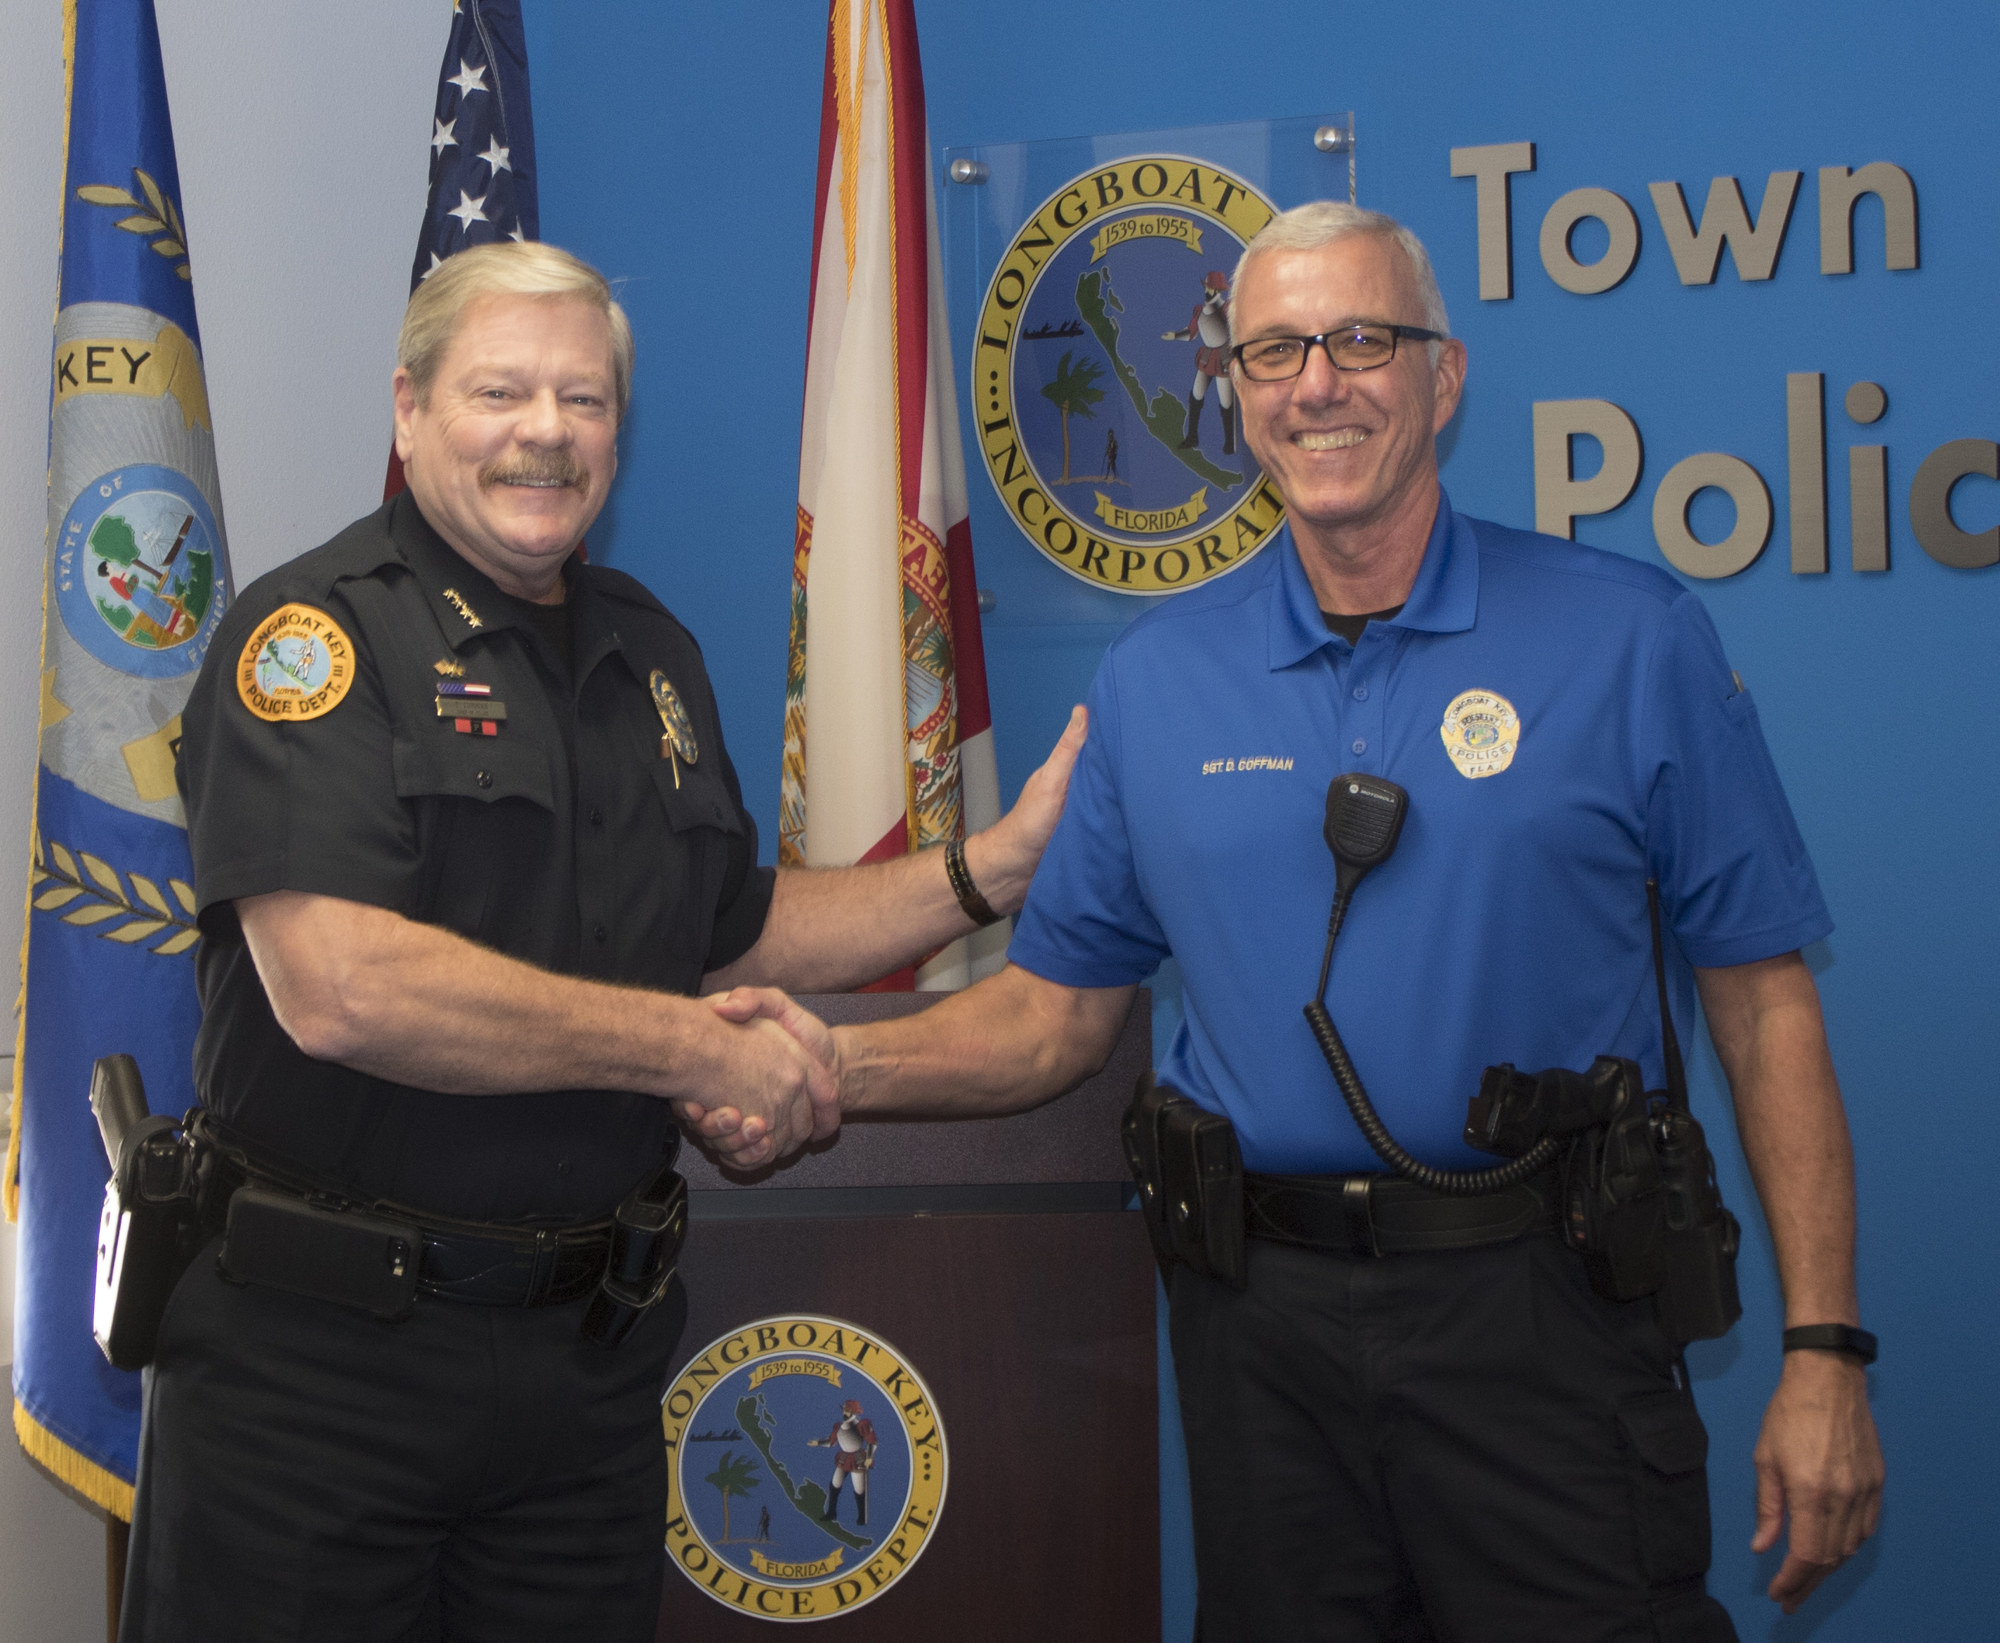 Police Chief Pete Cumming congratulates Sgt. Doug Coffman on his retirement from the Longboat Key Police Department and his 30 years in law enforcement.